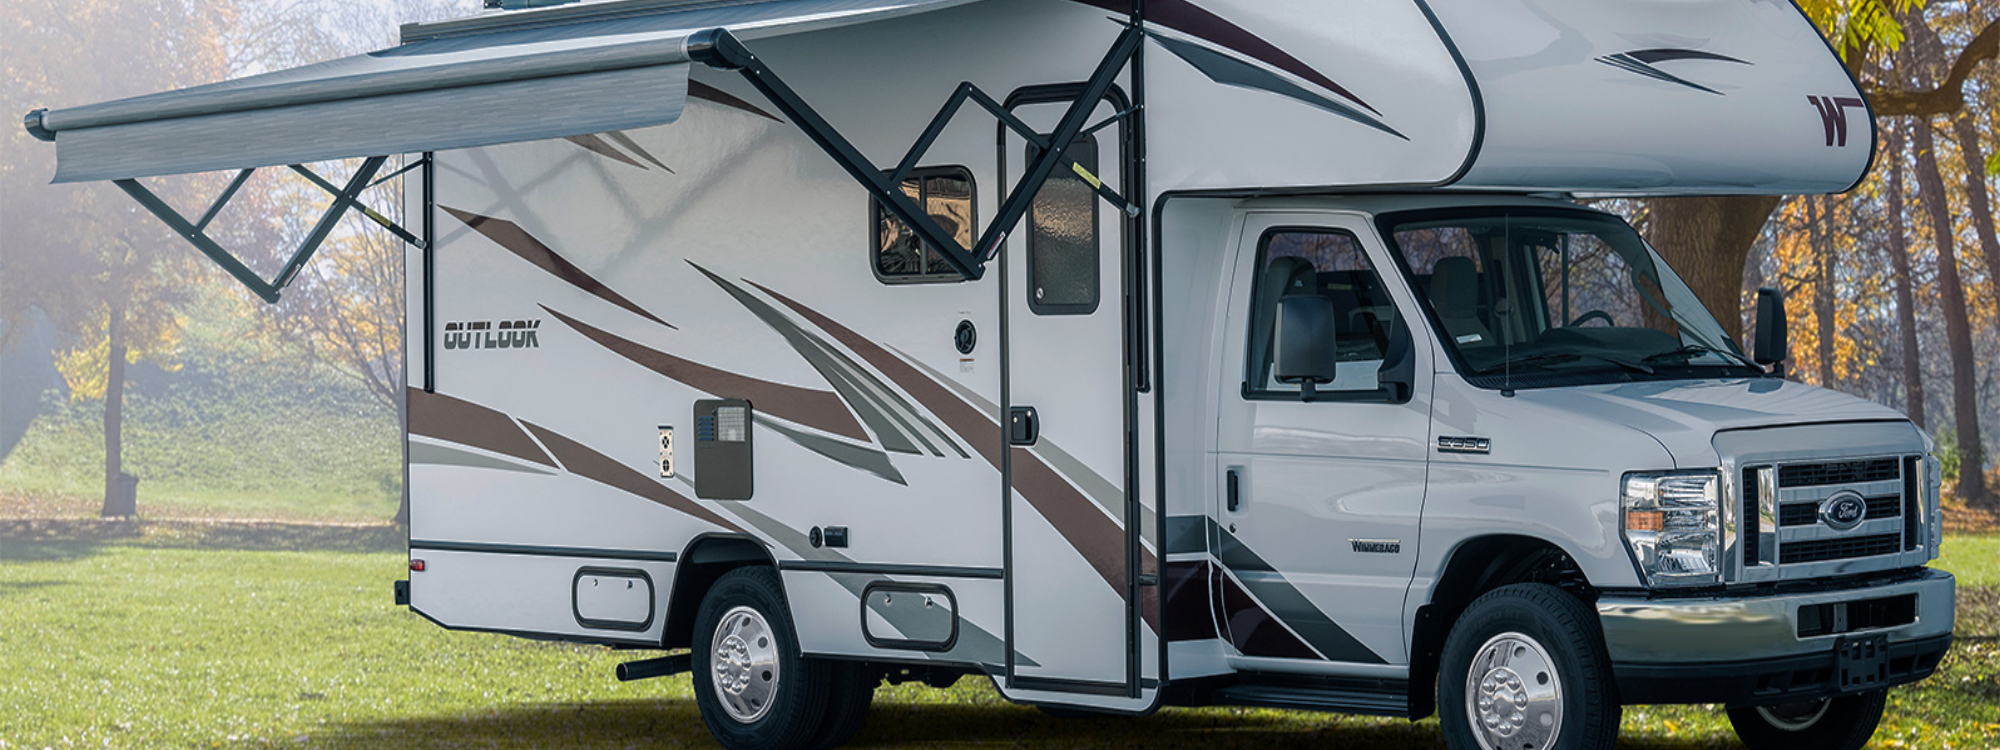 Winnebago Outlook exterior with awning extended